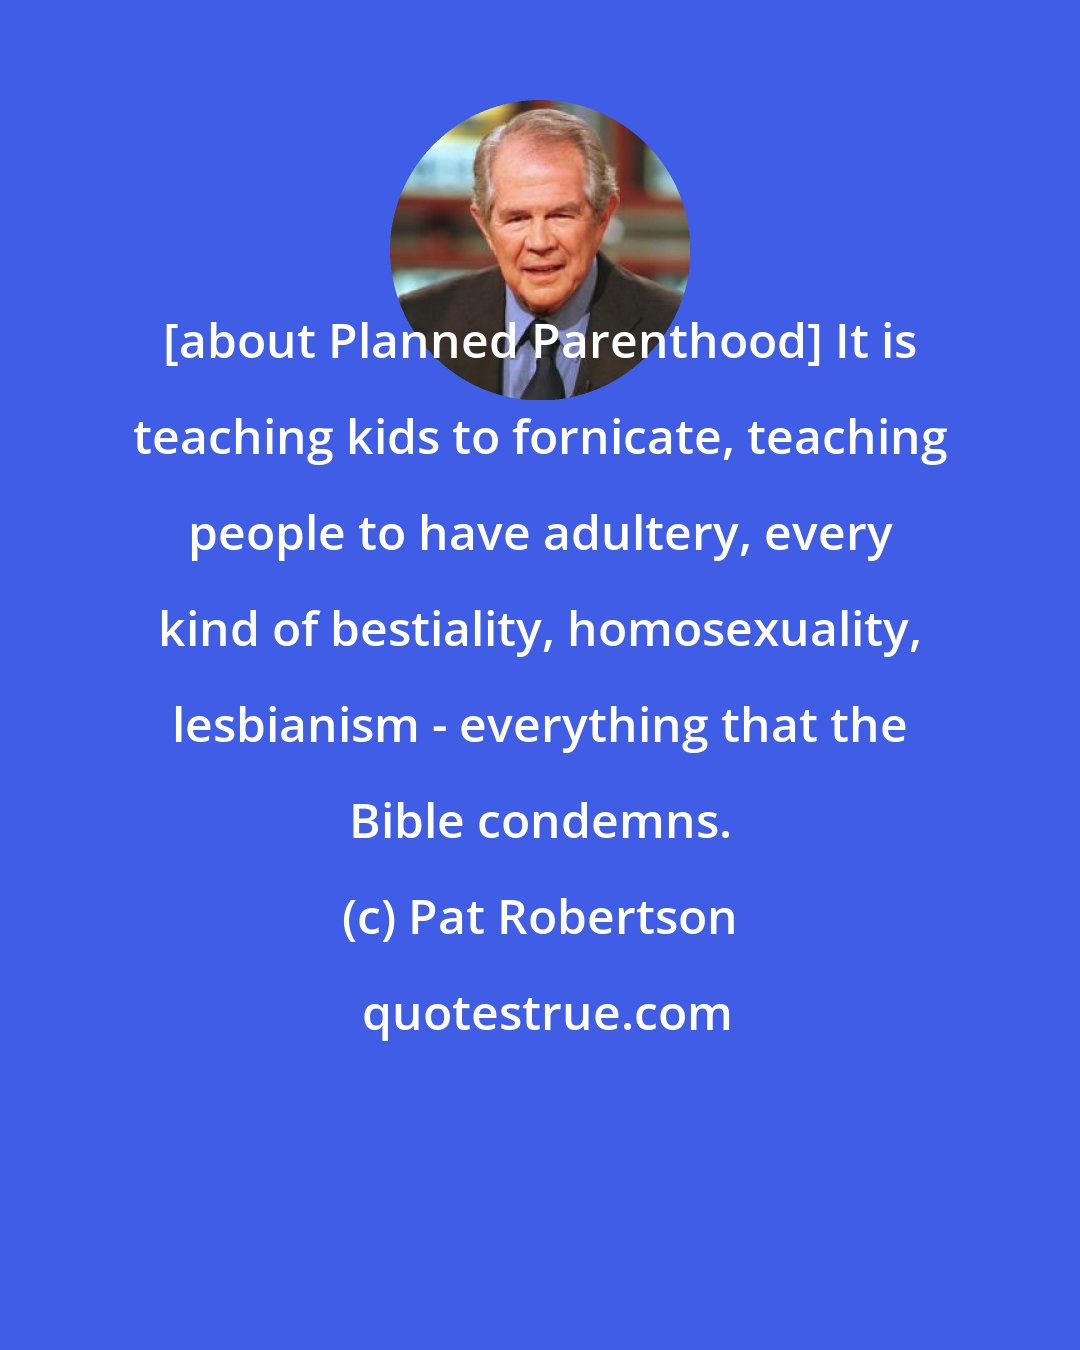 Pat Robertson: [about Planned Parenthood] It is teaching kids to fornicate, teaching people to have adultery, every kind of bestiality, homosexuality, lesbianism - everything that the Bible condemns.